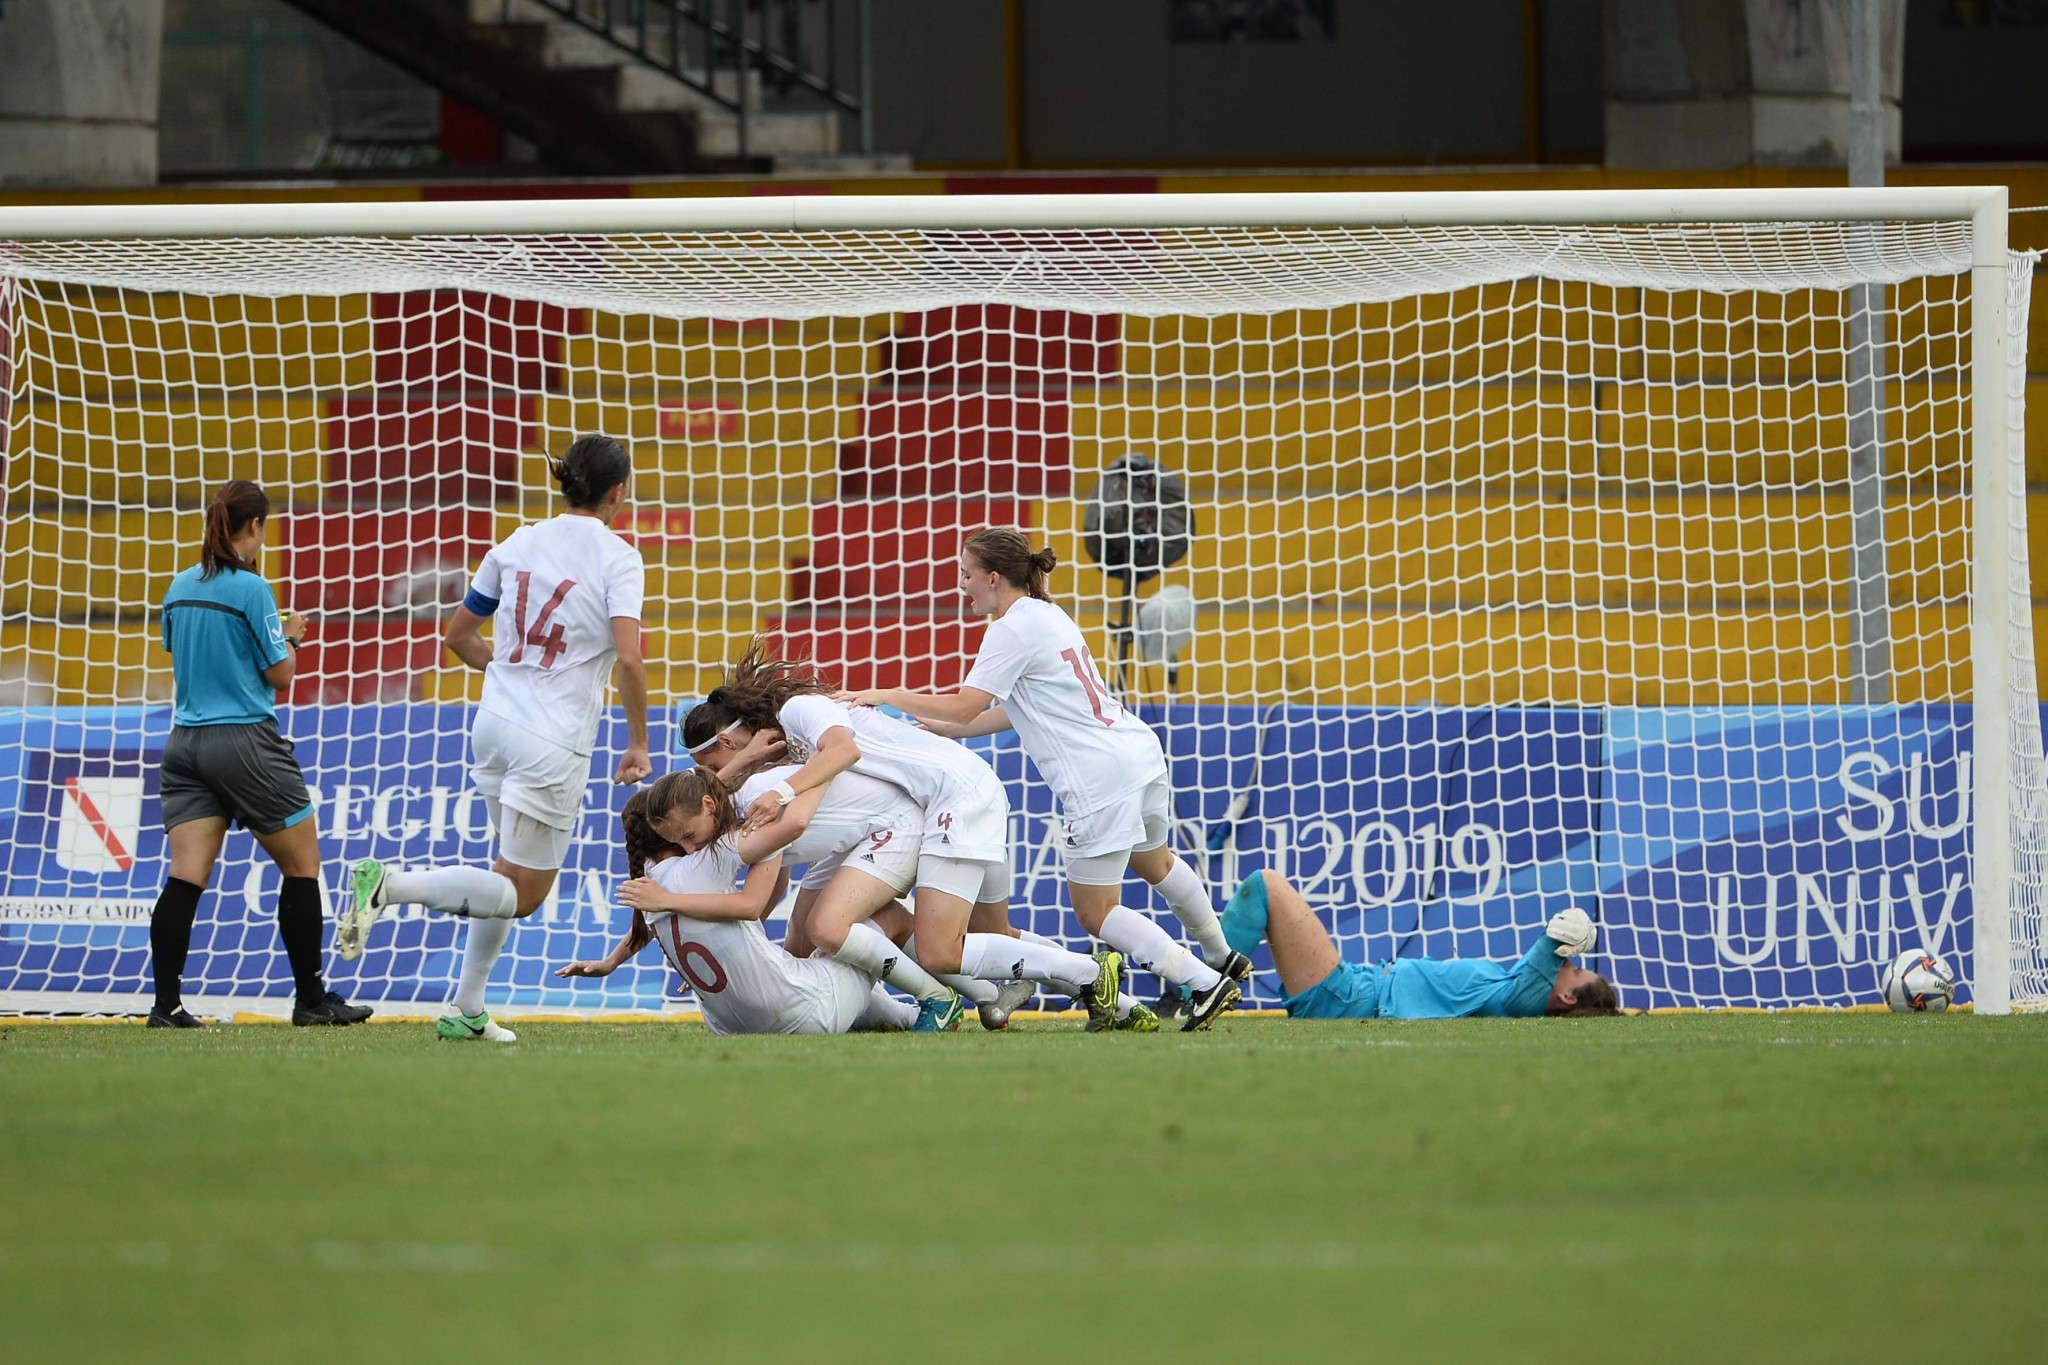 Russia celebrate their women's football bronze medal after defeating Ireland in a penalty shootout ©Naples 2019